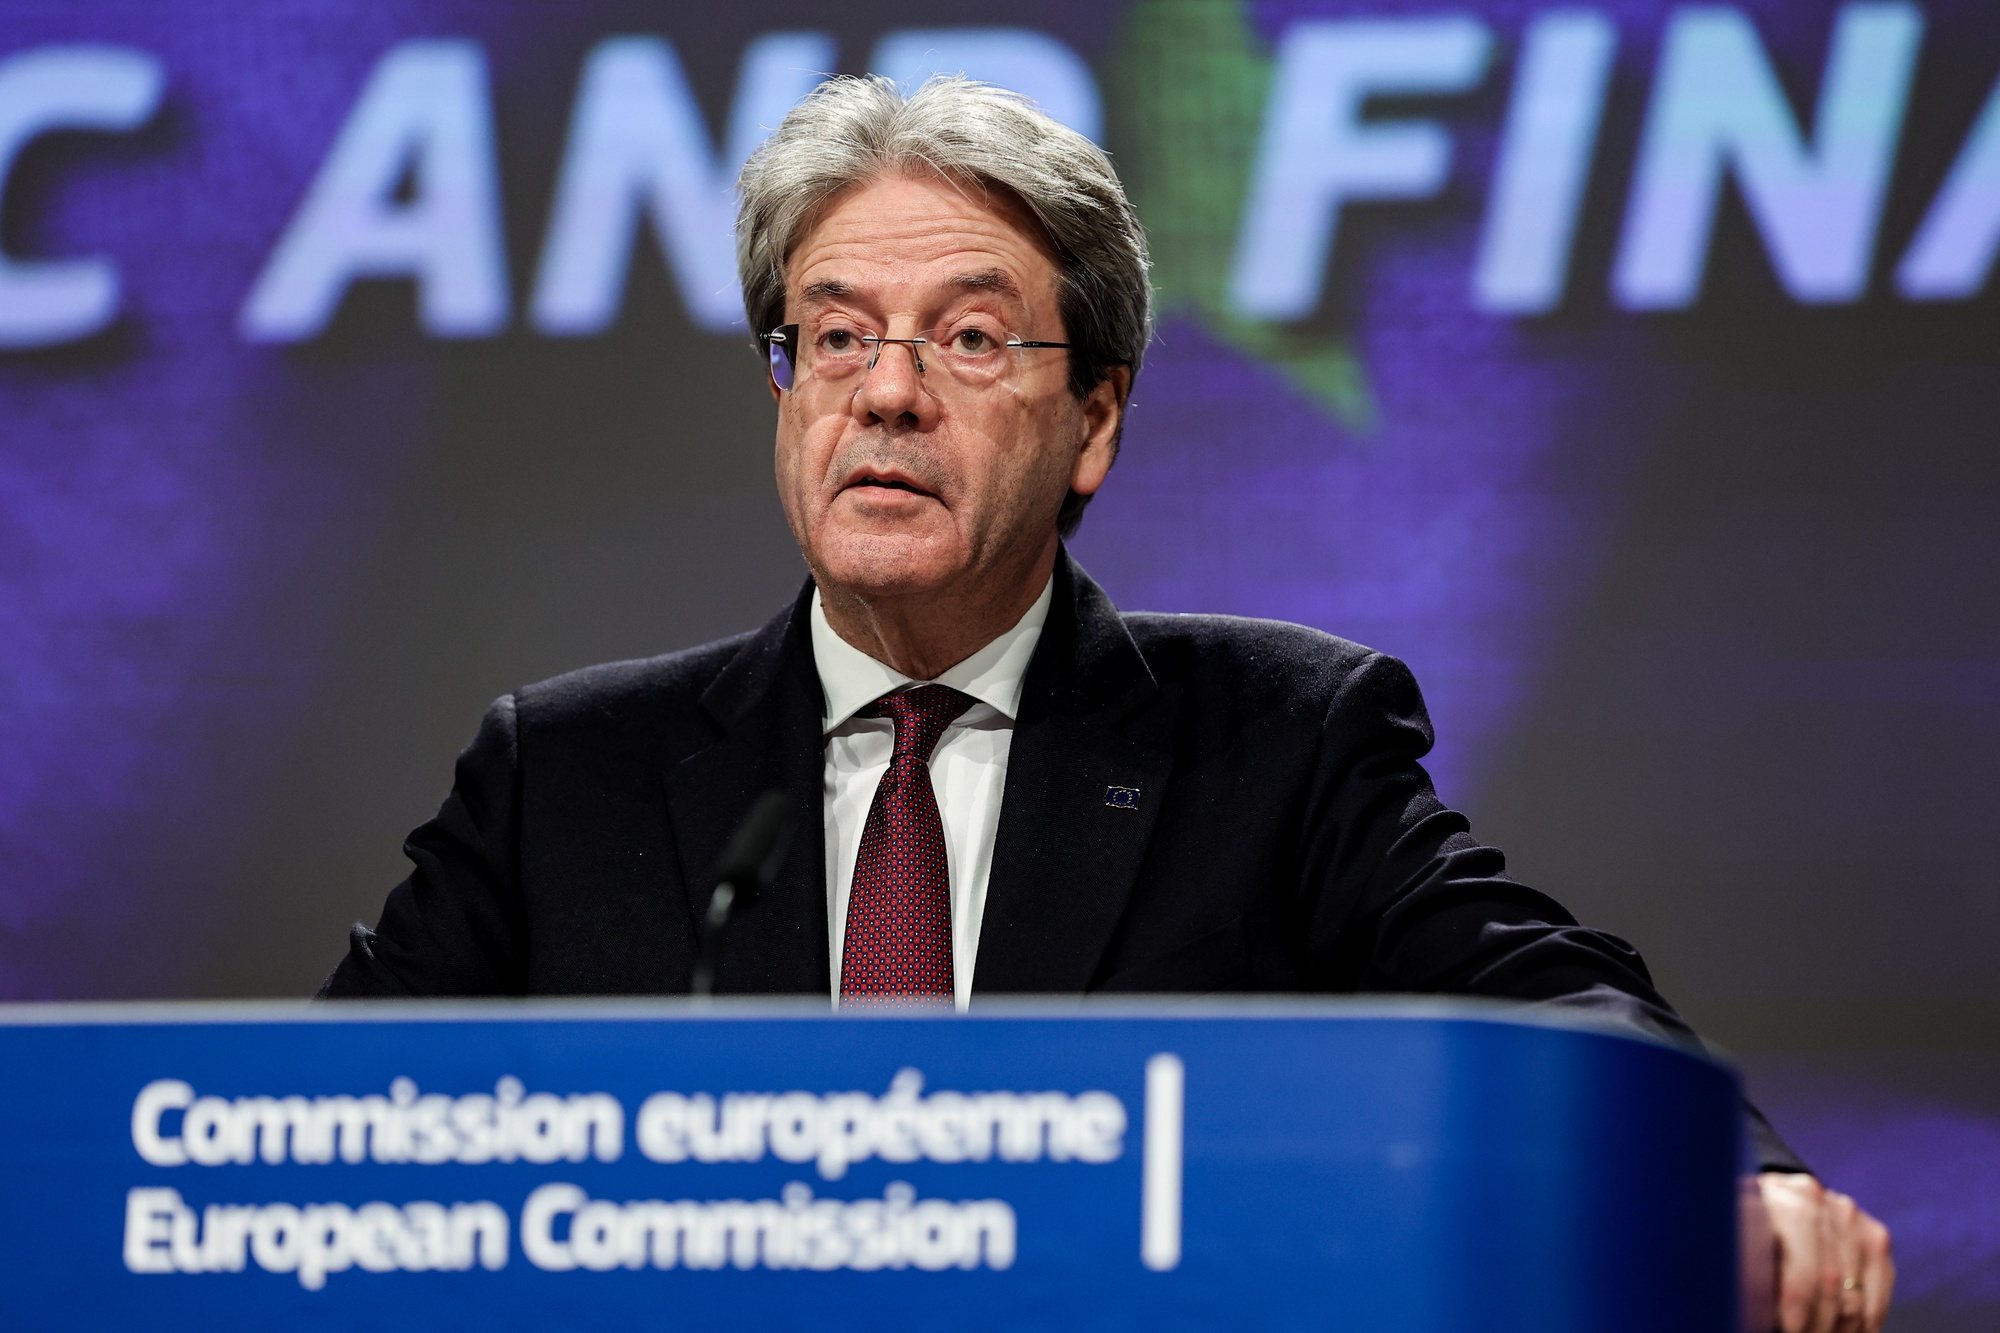 epa08949202 EU commissioners for Economy Paolo Gentiloni speaks at a press conference on the fostering the openness, strength and resilience of Europe&#039;s economic and financial system, at the European Union headquarters in Brussels, Belgium, 19 January 2021.  EPA/KENZO TRIBOUILLARD / POOL